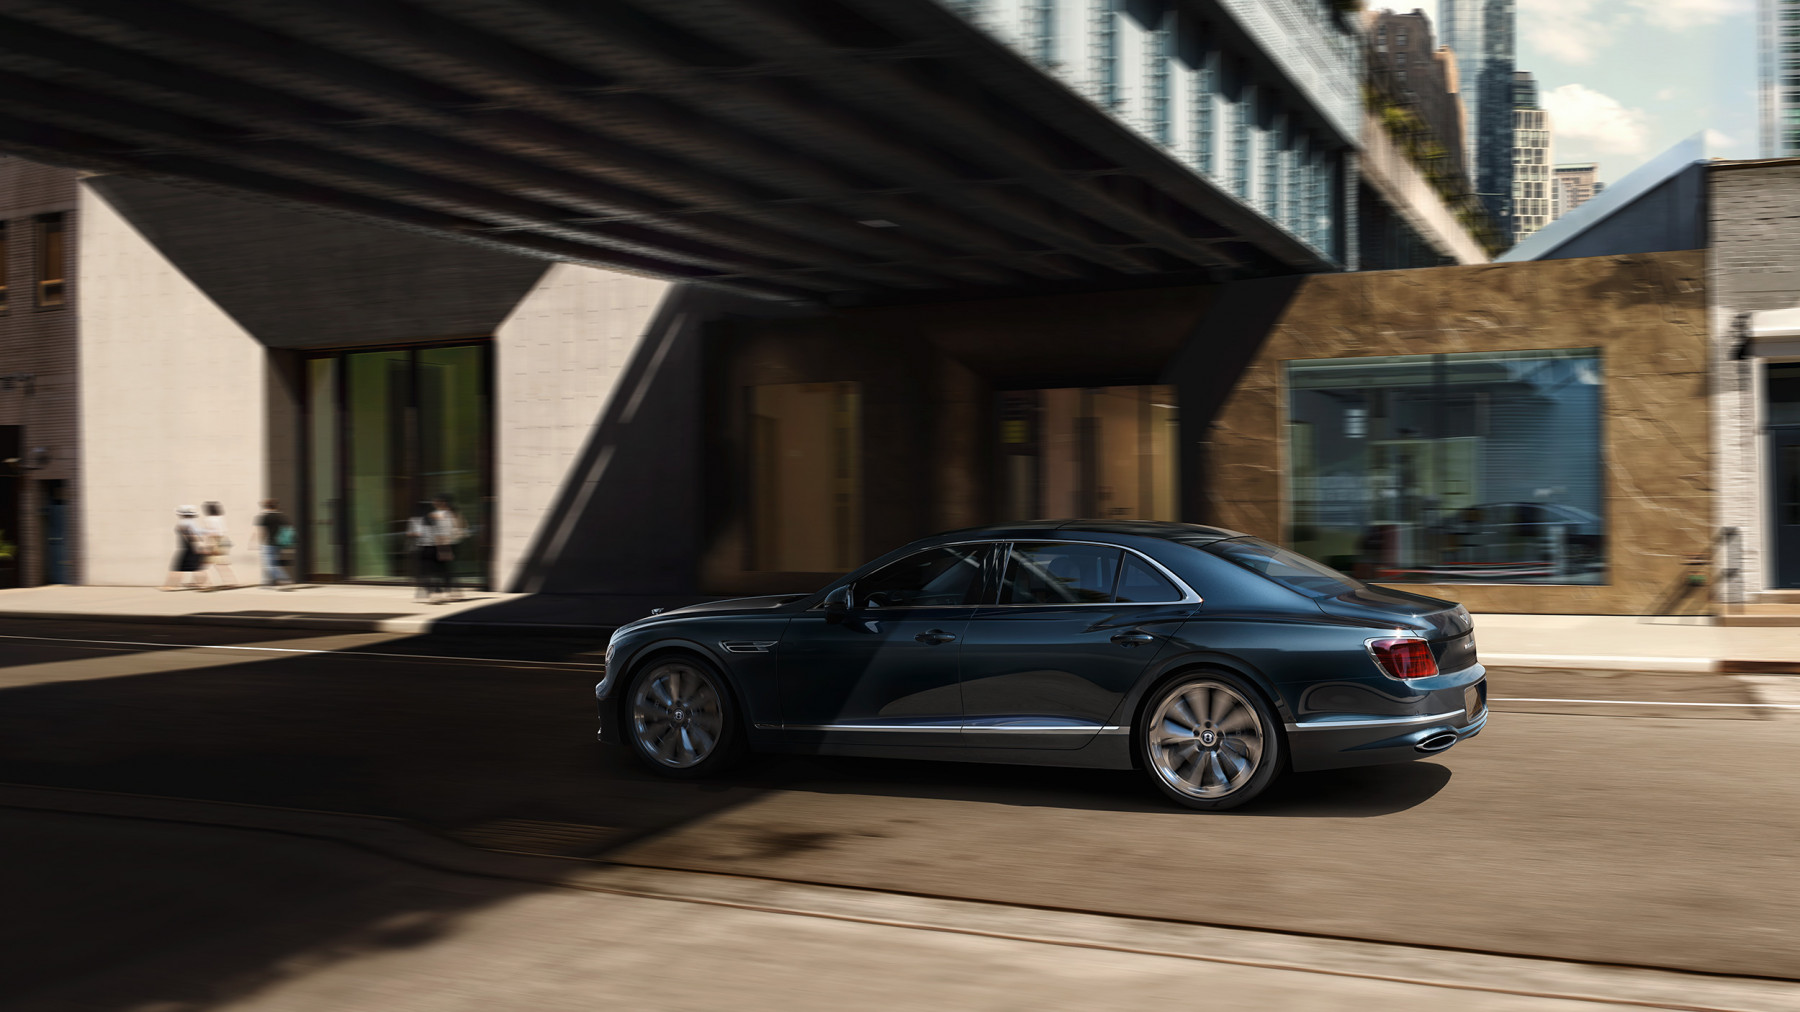 The new Bentley Flying Spur 5